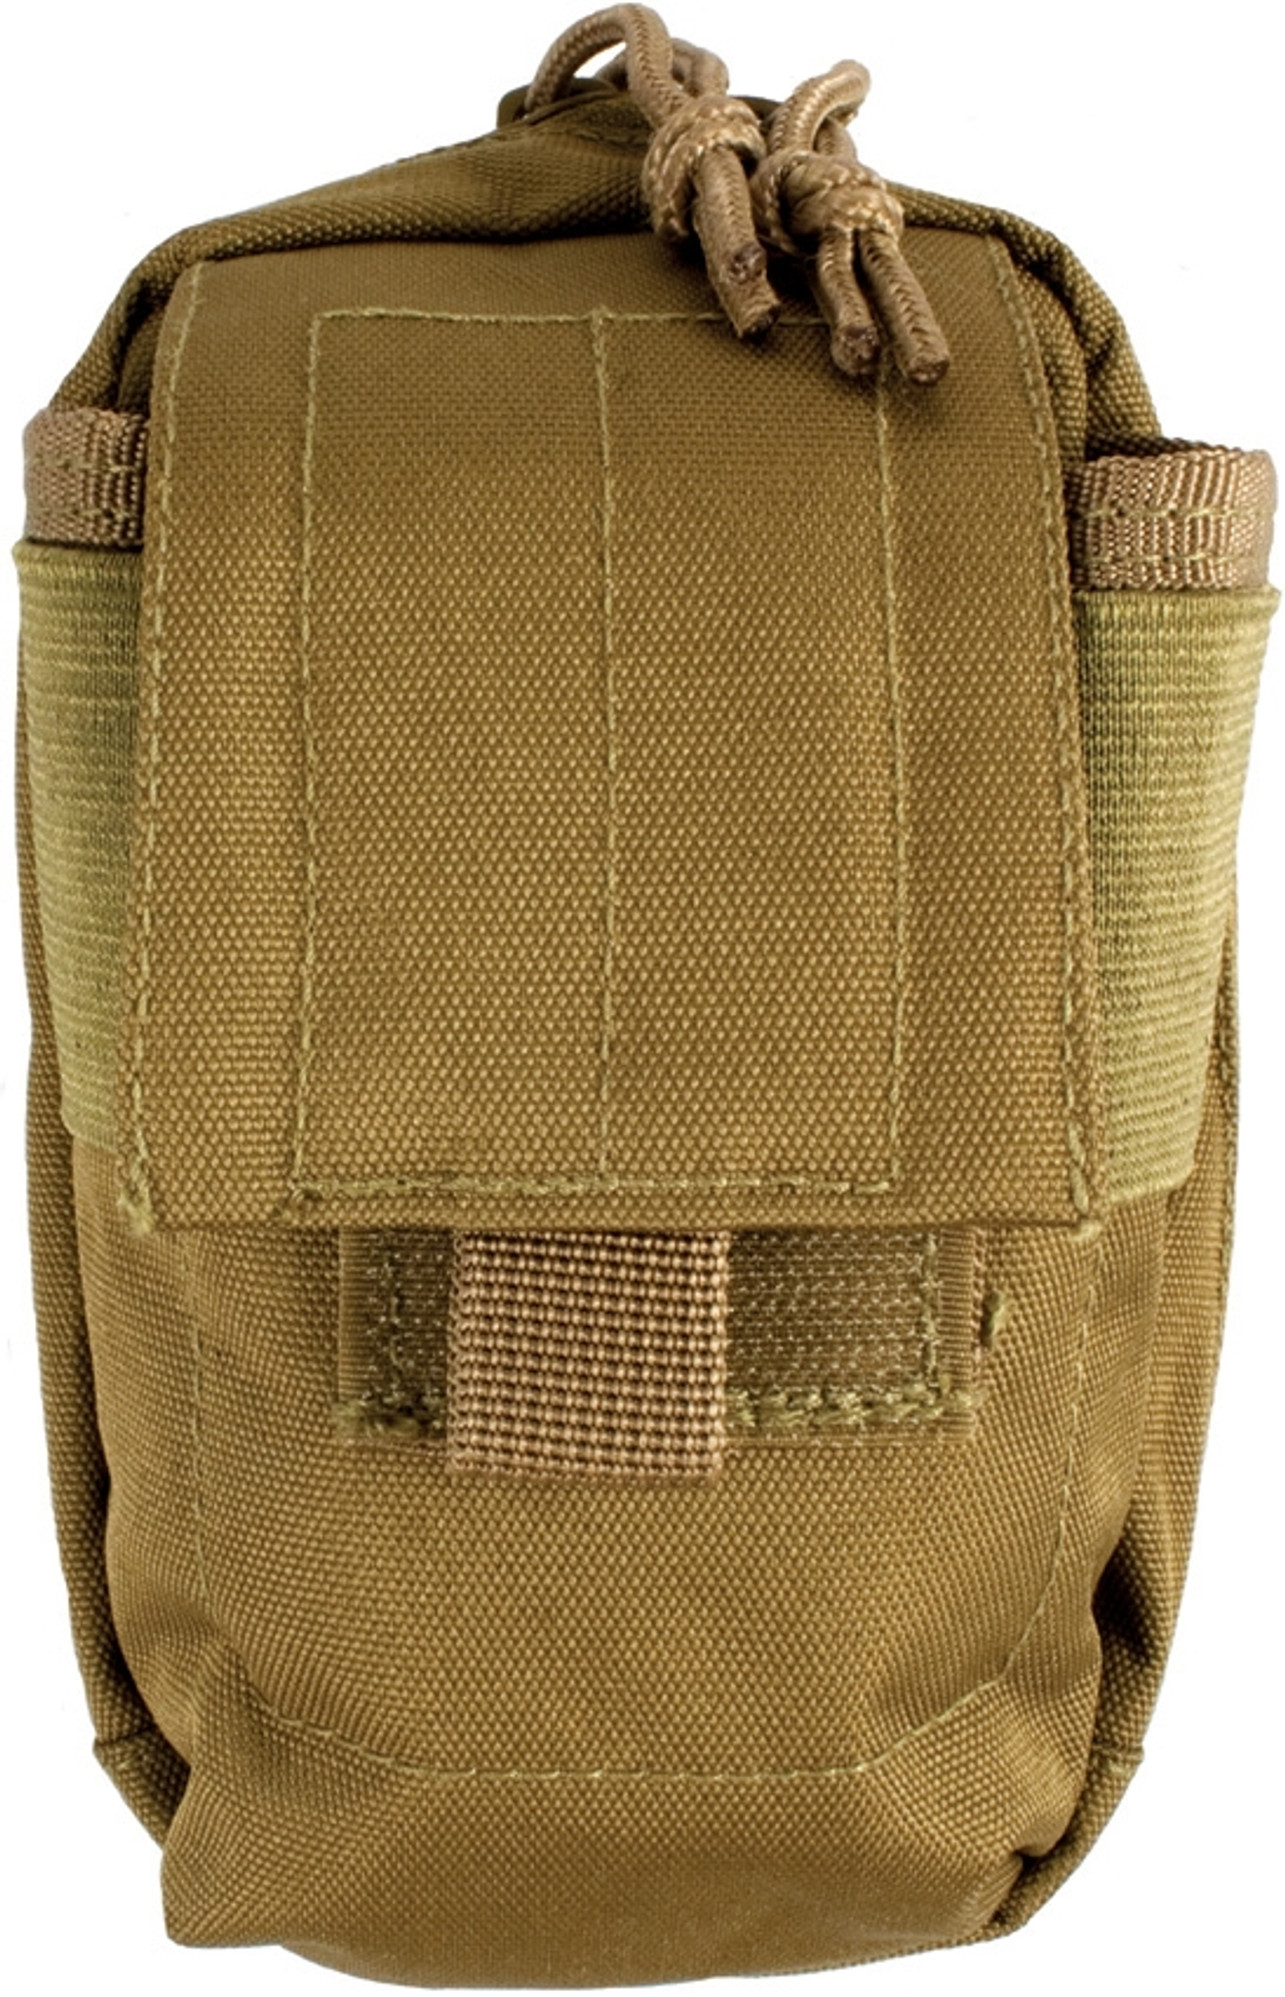 MOLLE Media Pouch Coyote